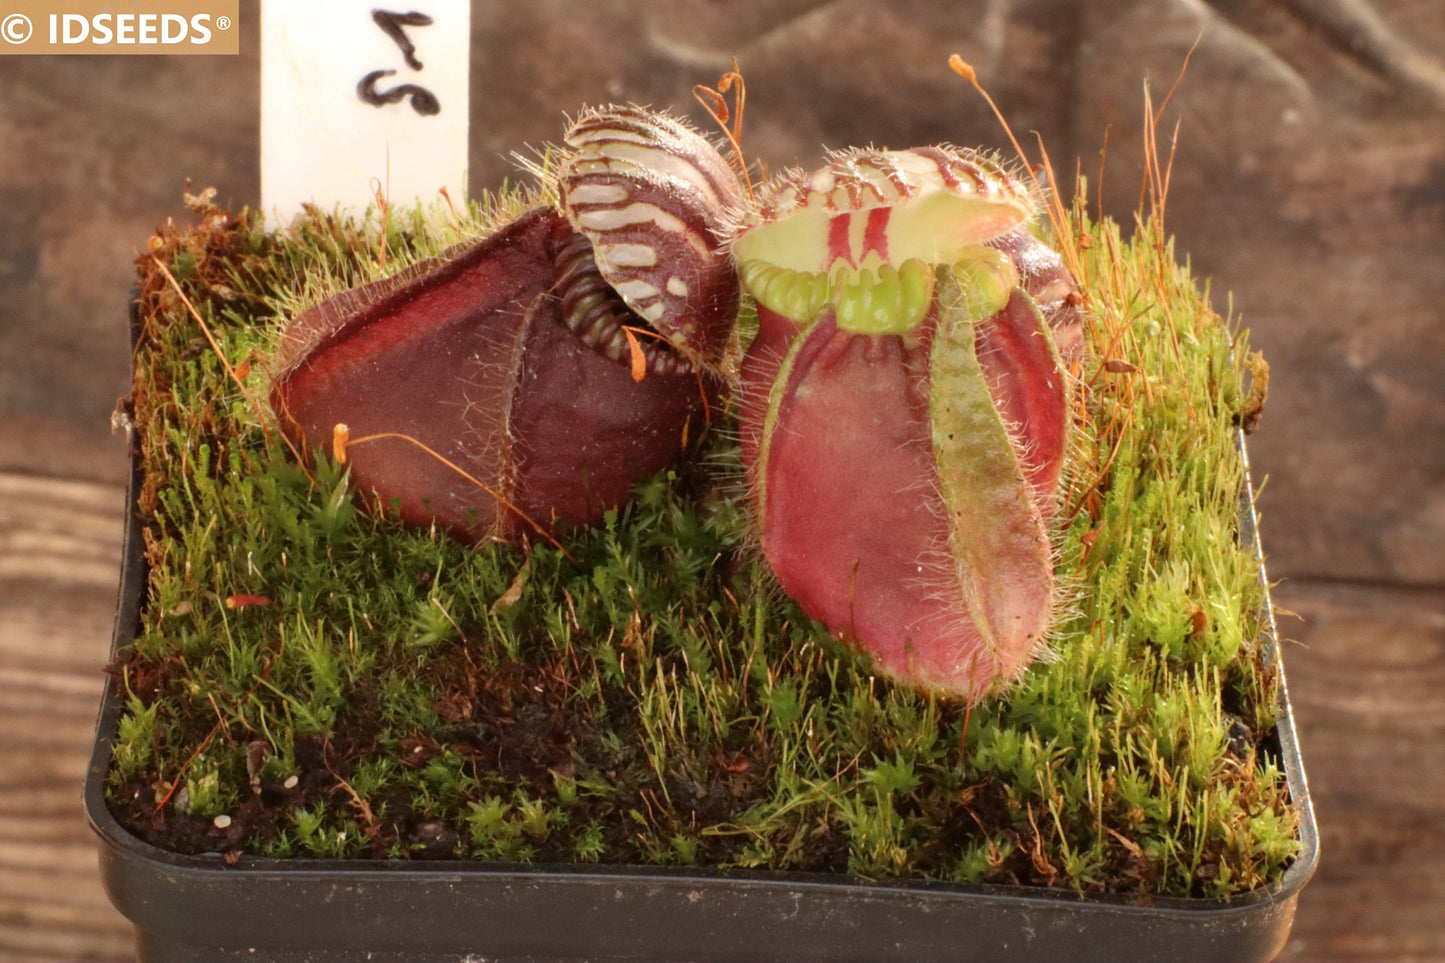 Cephalotus Follicularis ‘Hummer’s Giant - Extremely Rare Carnivorous - Australian Pitcher Plant - 3 Fresh Seeds - Very Limited Quantity